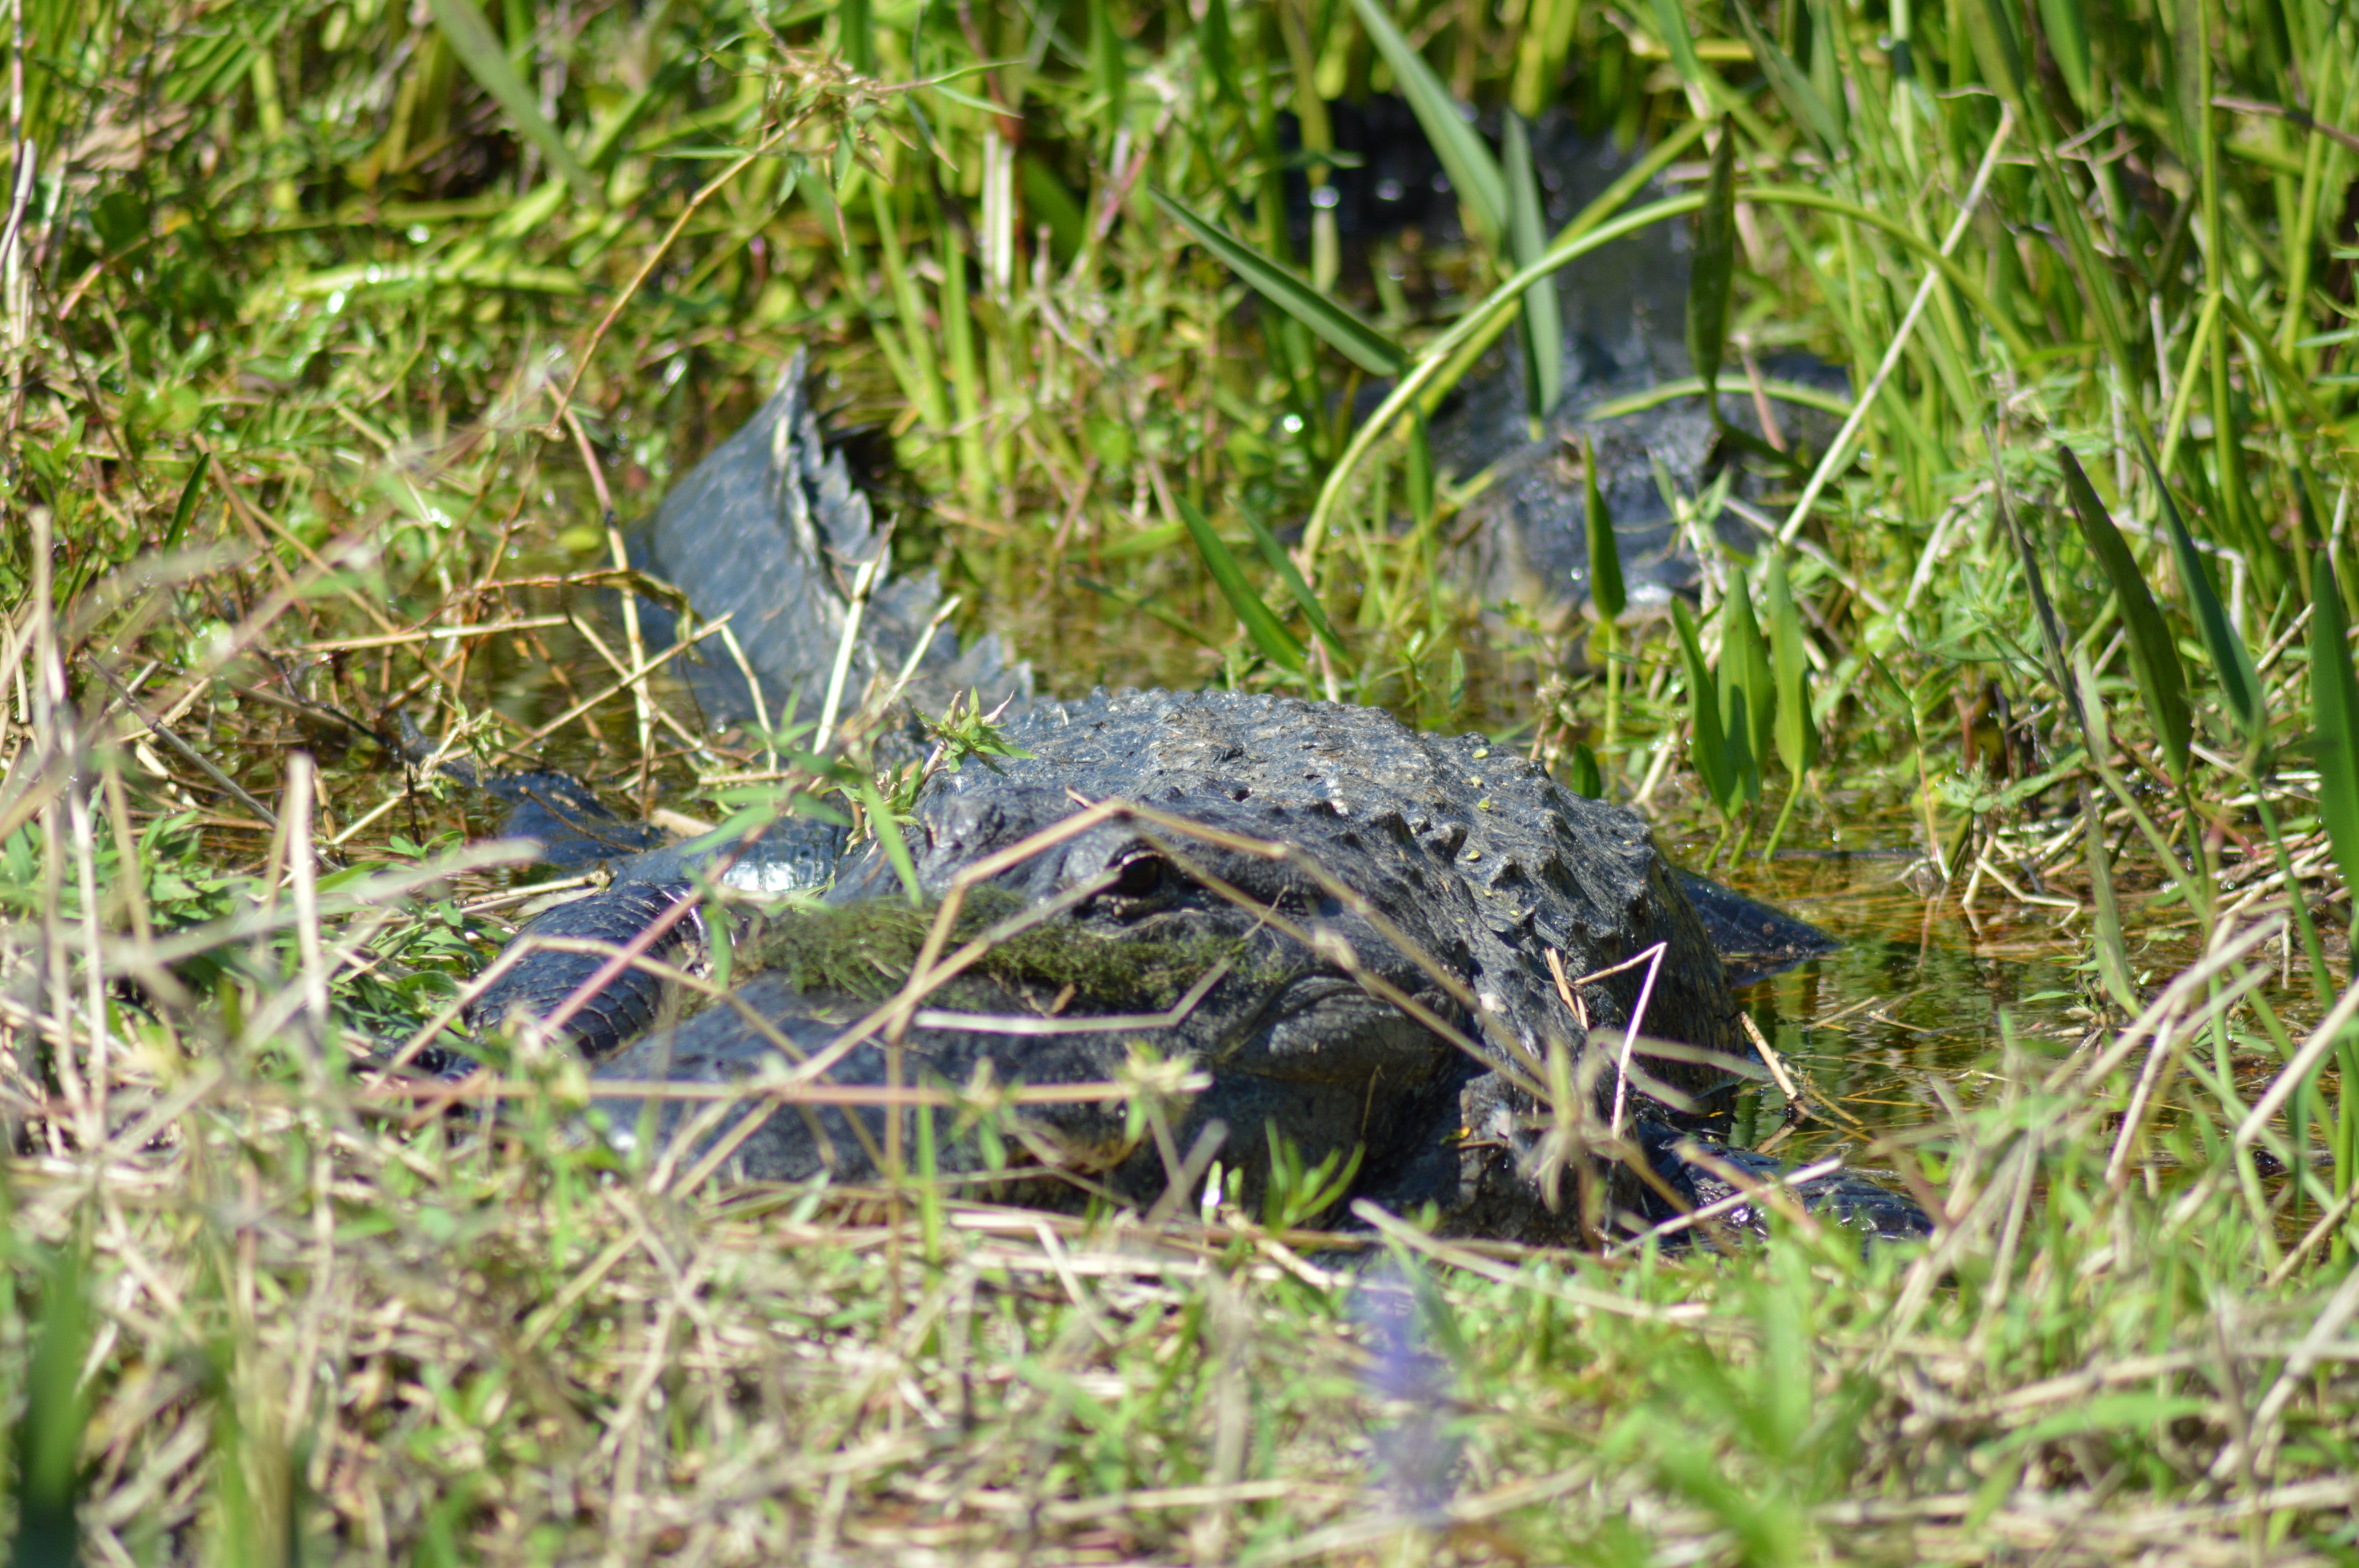 Adult gator sitting in the Everglades at Wild Florida